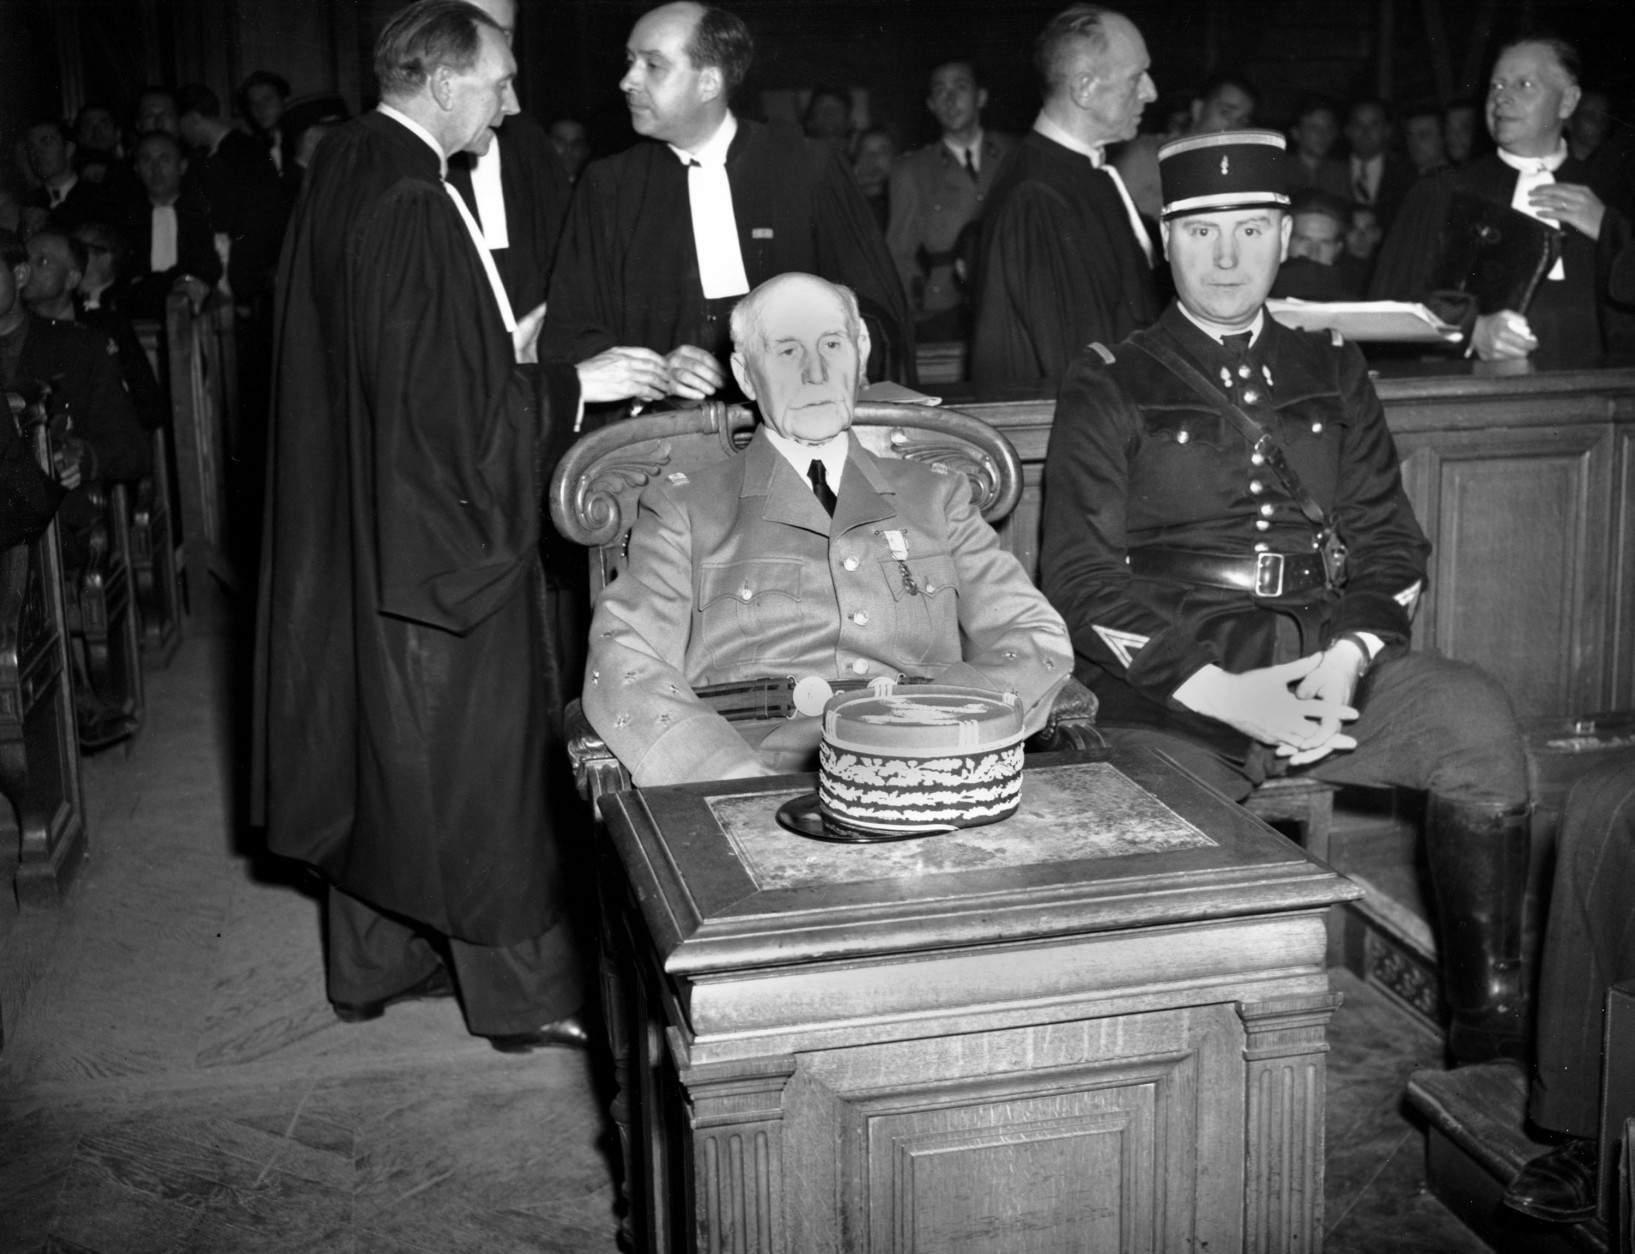 French Marshal Henri Philippe Petain sits in court as his trial opened in Paris, France on July 23, 1945.  (AP Photo/Carroll)